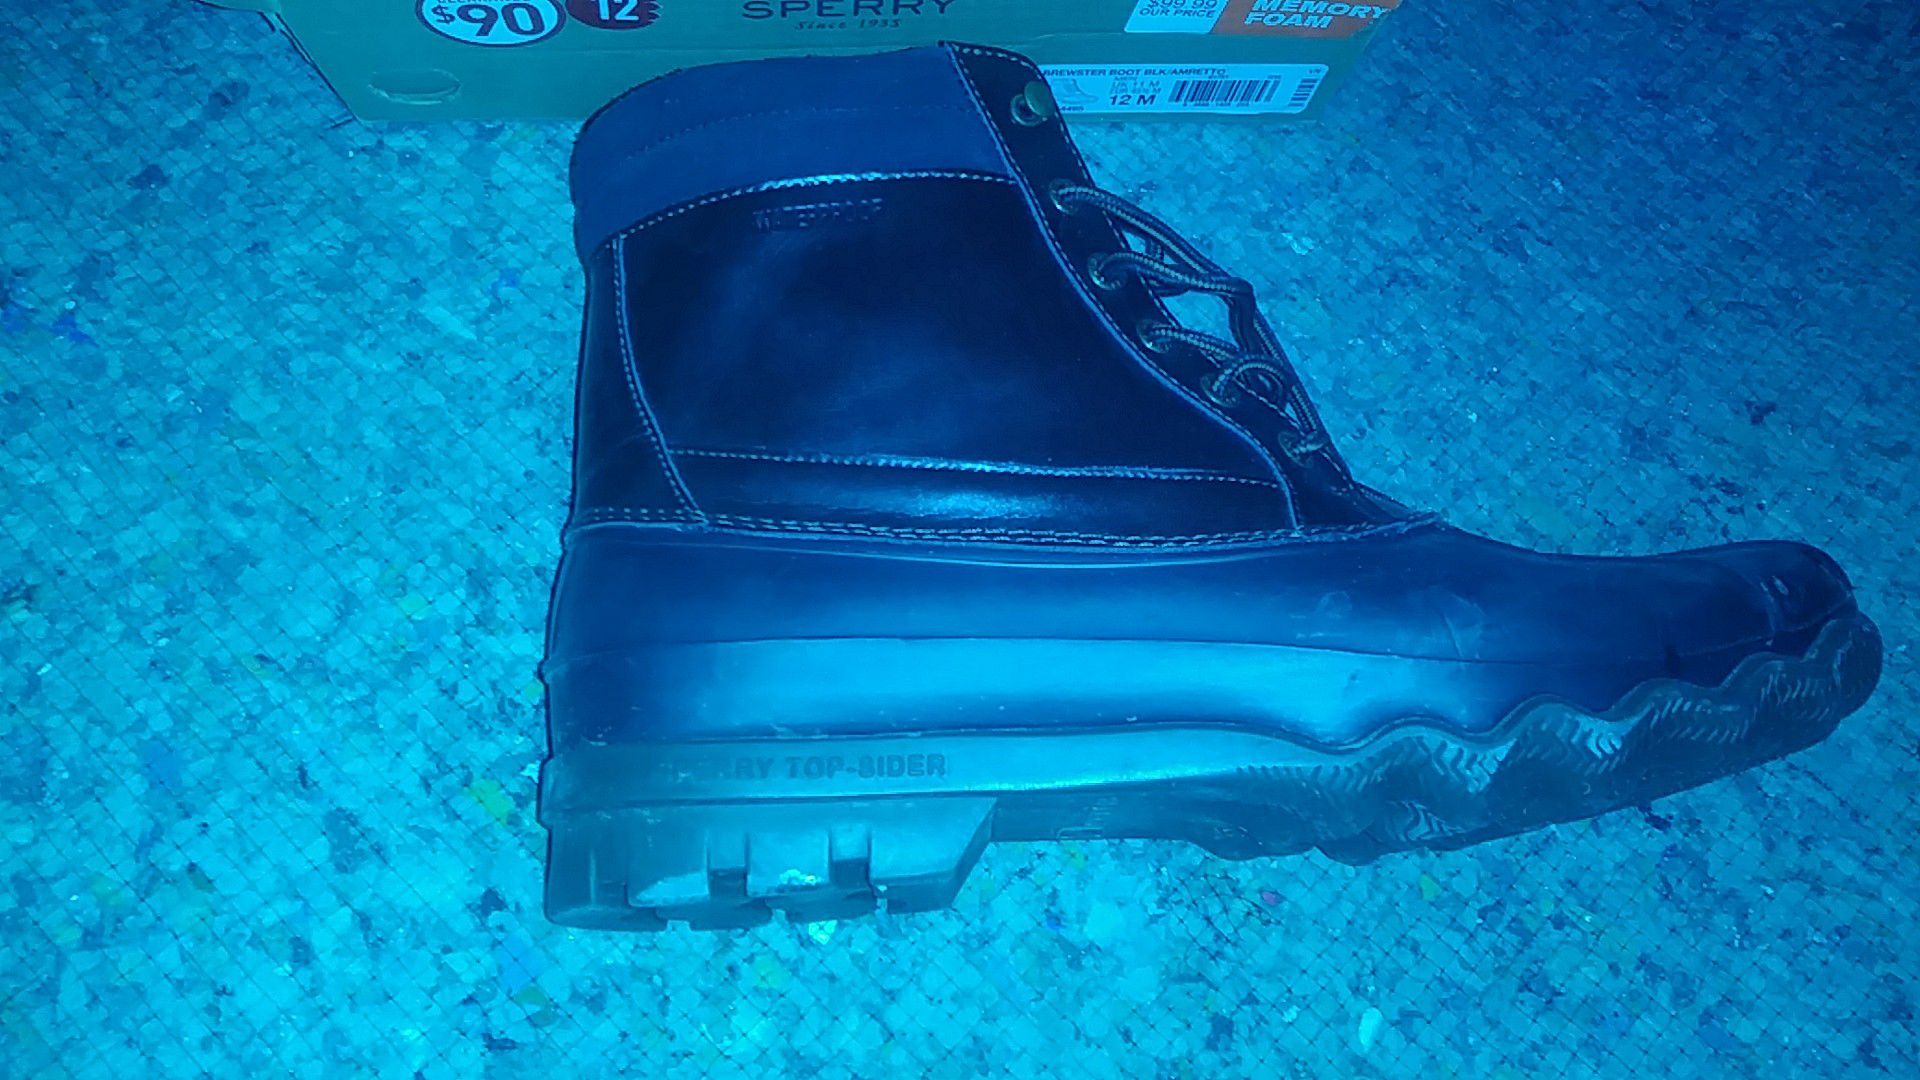 Sperry Brewster boots size 12